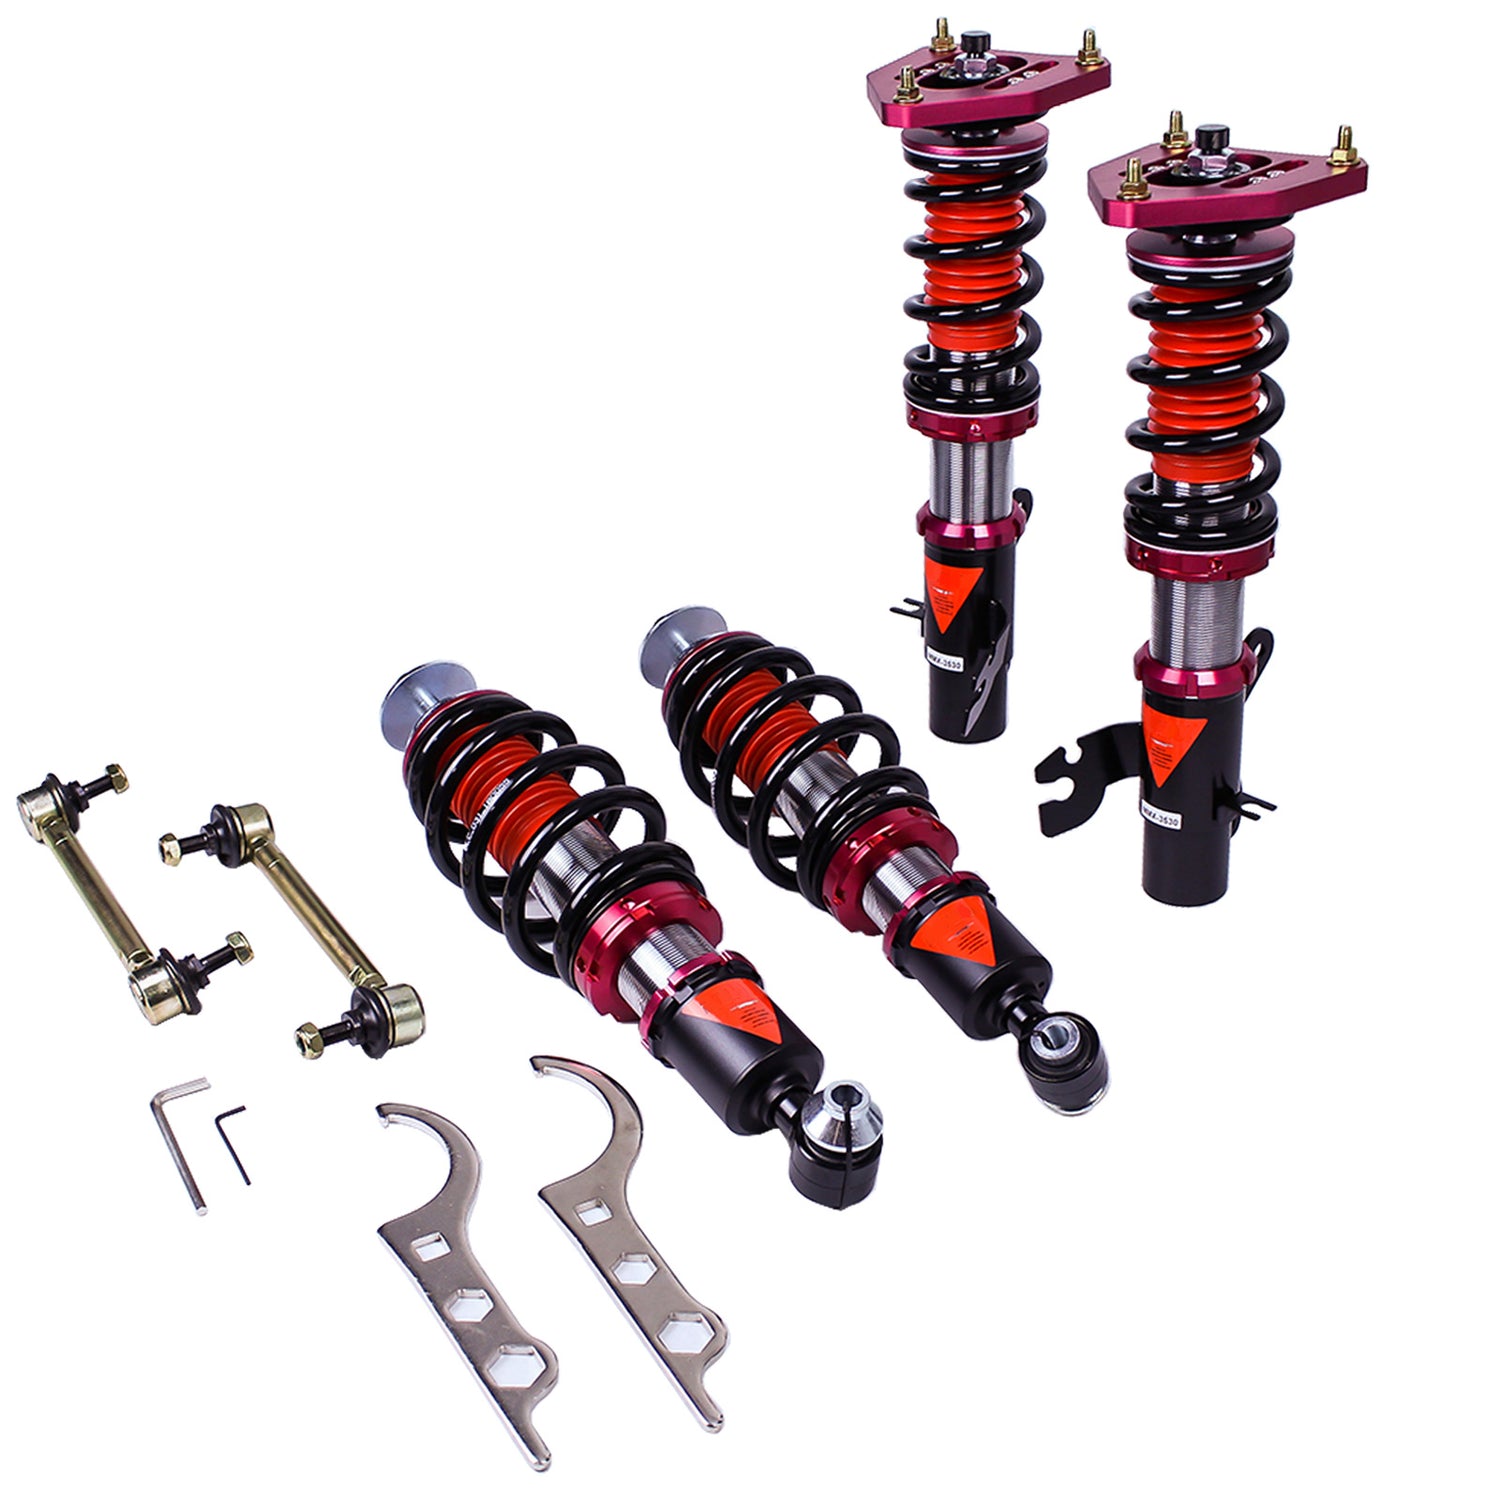 MMX3530 MAXX Coilovers Lowering Kit, Fully Adjustable, Ride Height, 40 Damping Settings, compatible with MINI Cooper (R56/R57) 2007-13